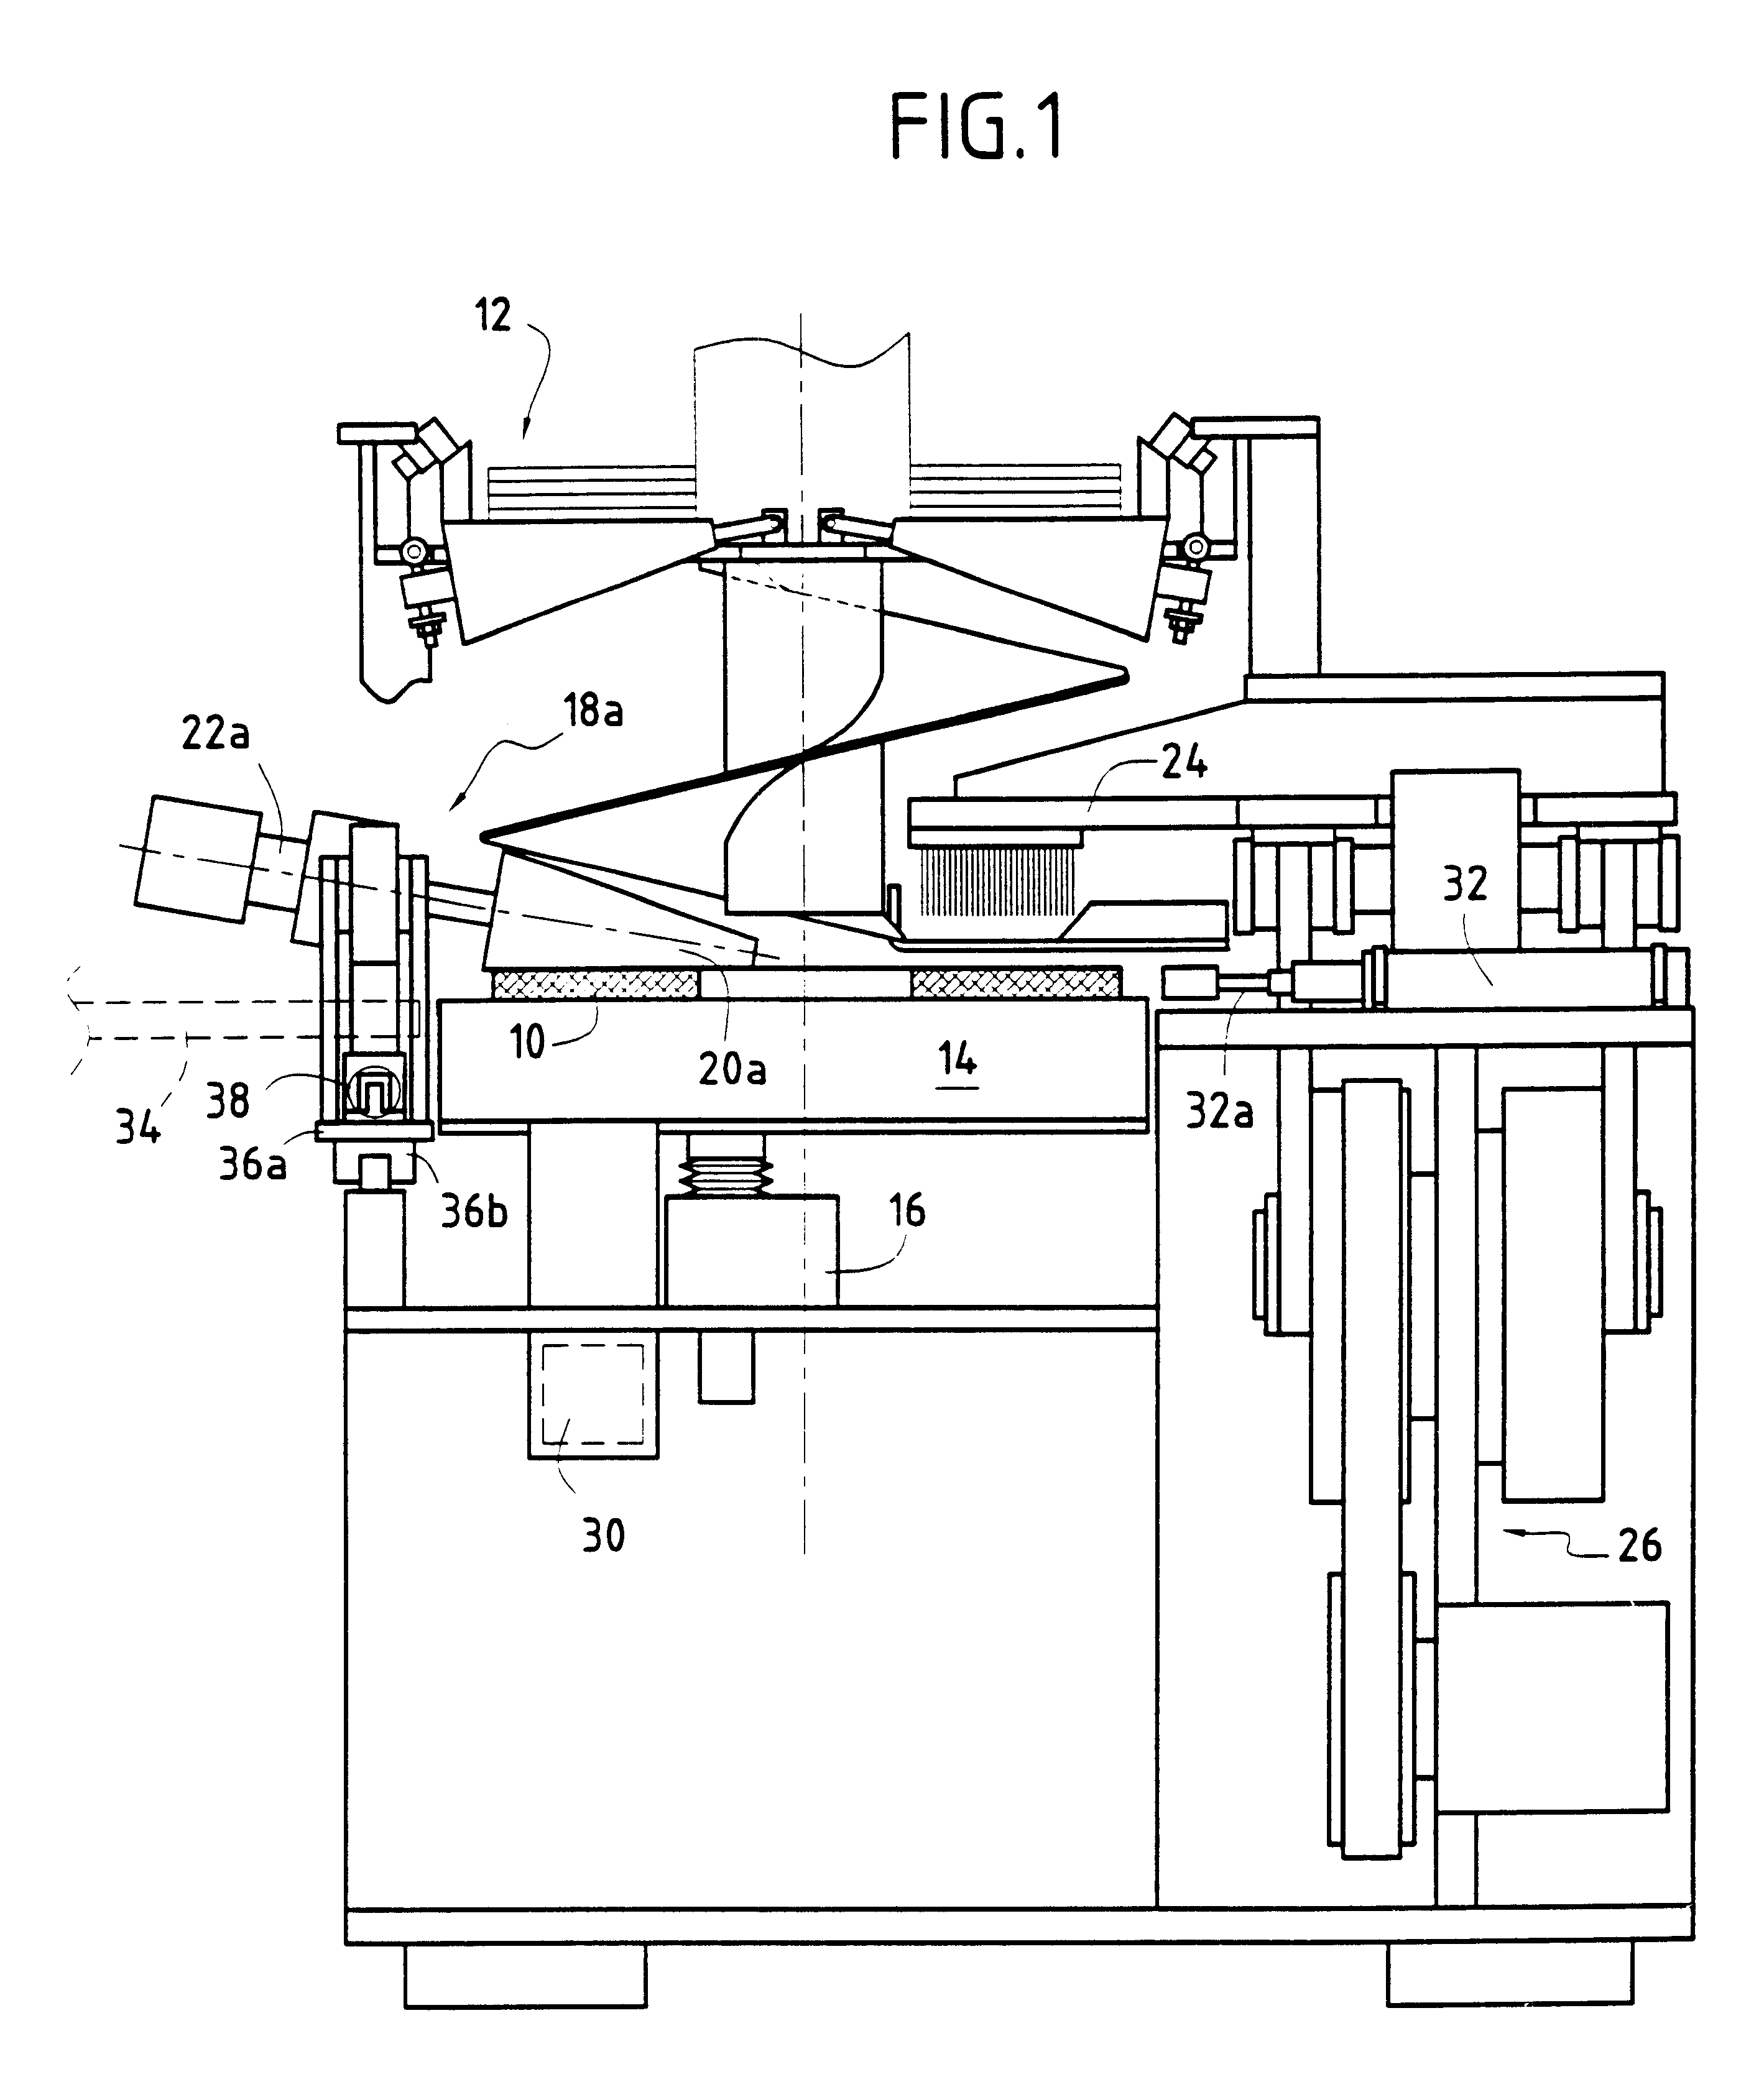 Circular needling machine provided with a device for automatically removing preforms